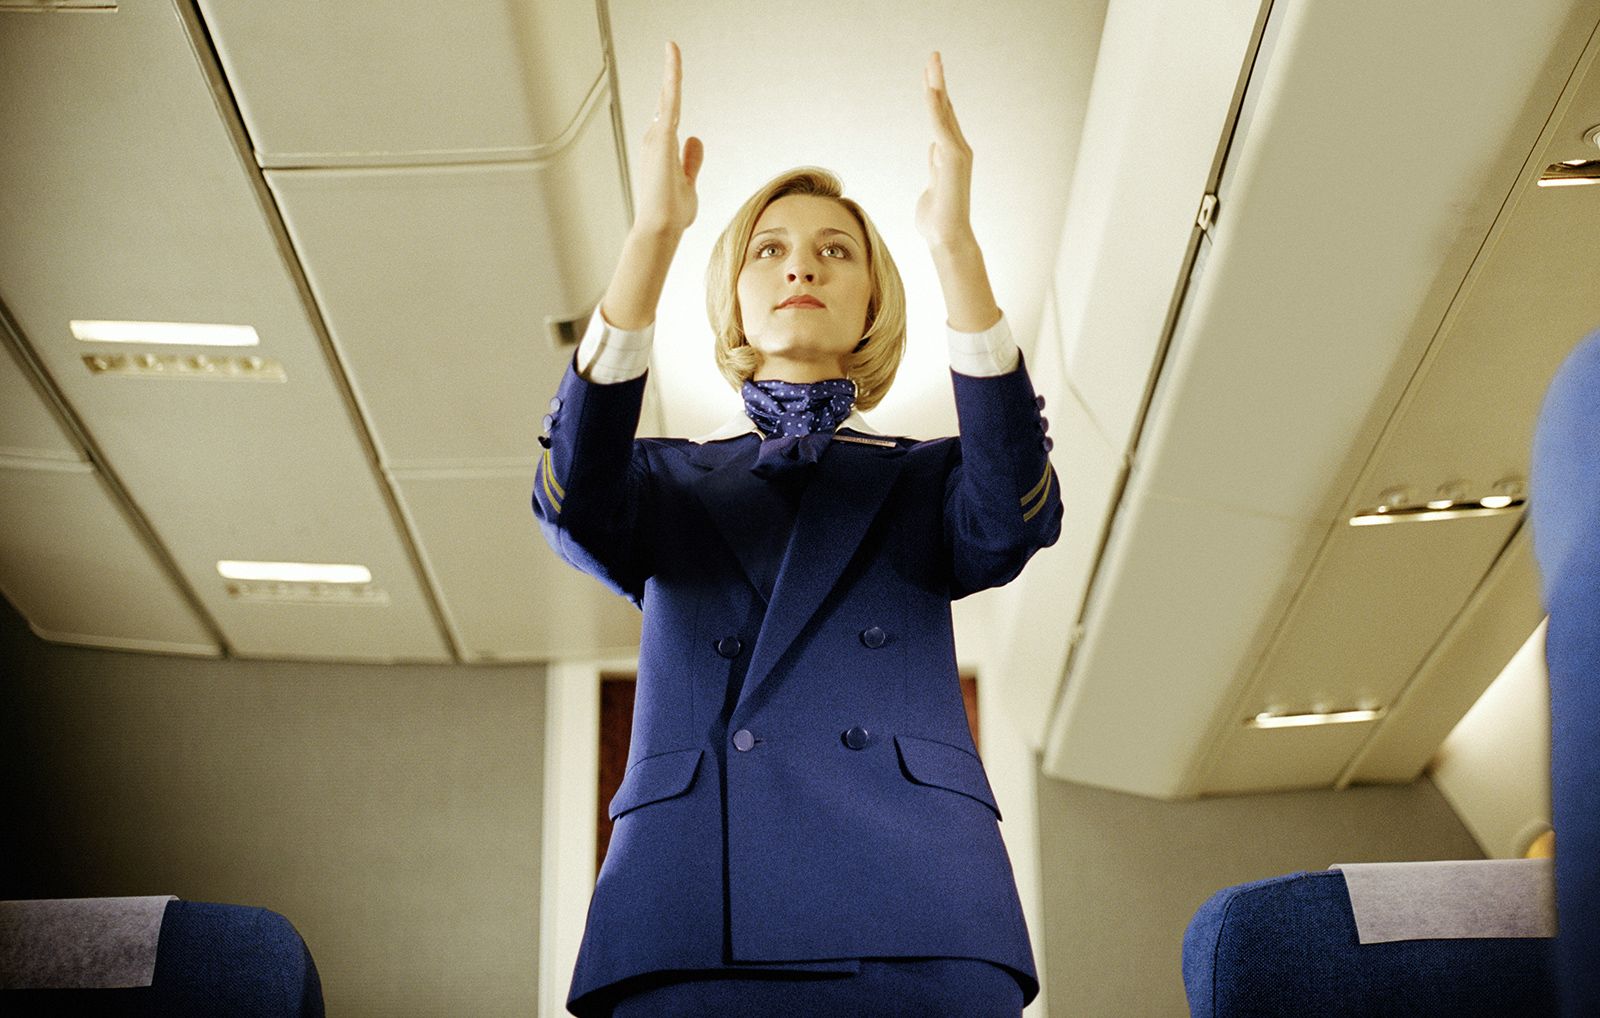 Stop rating flight attendants on how hot they are